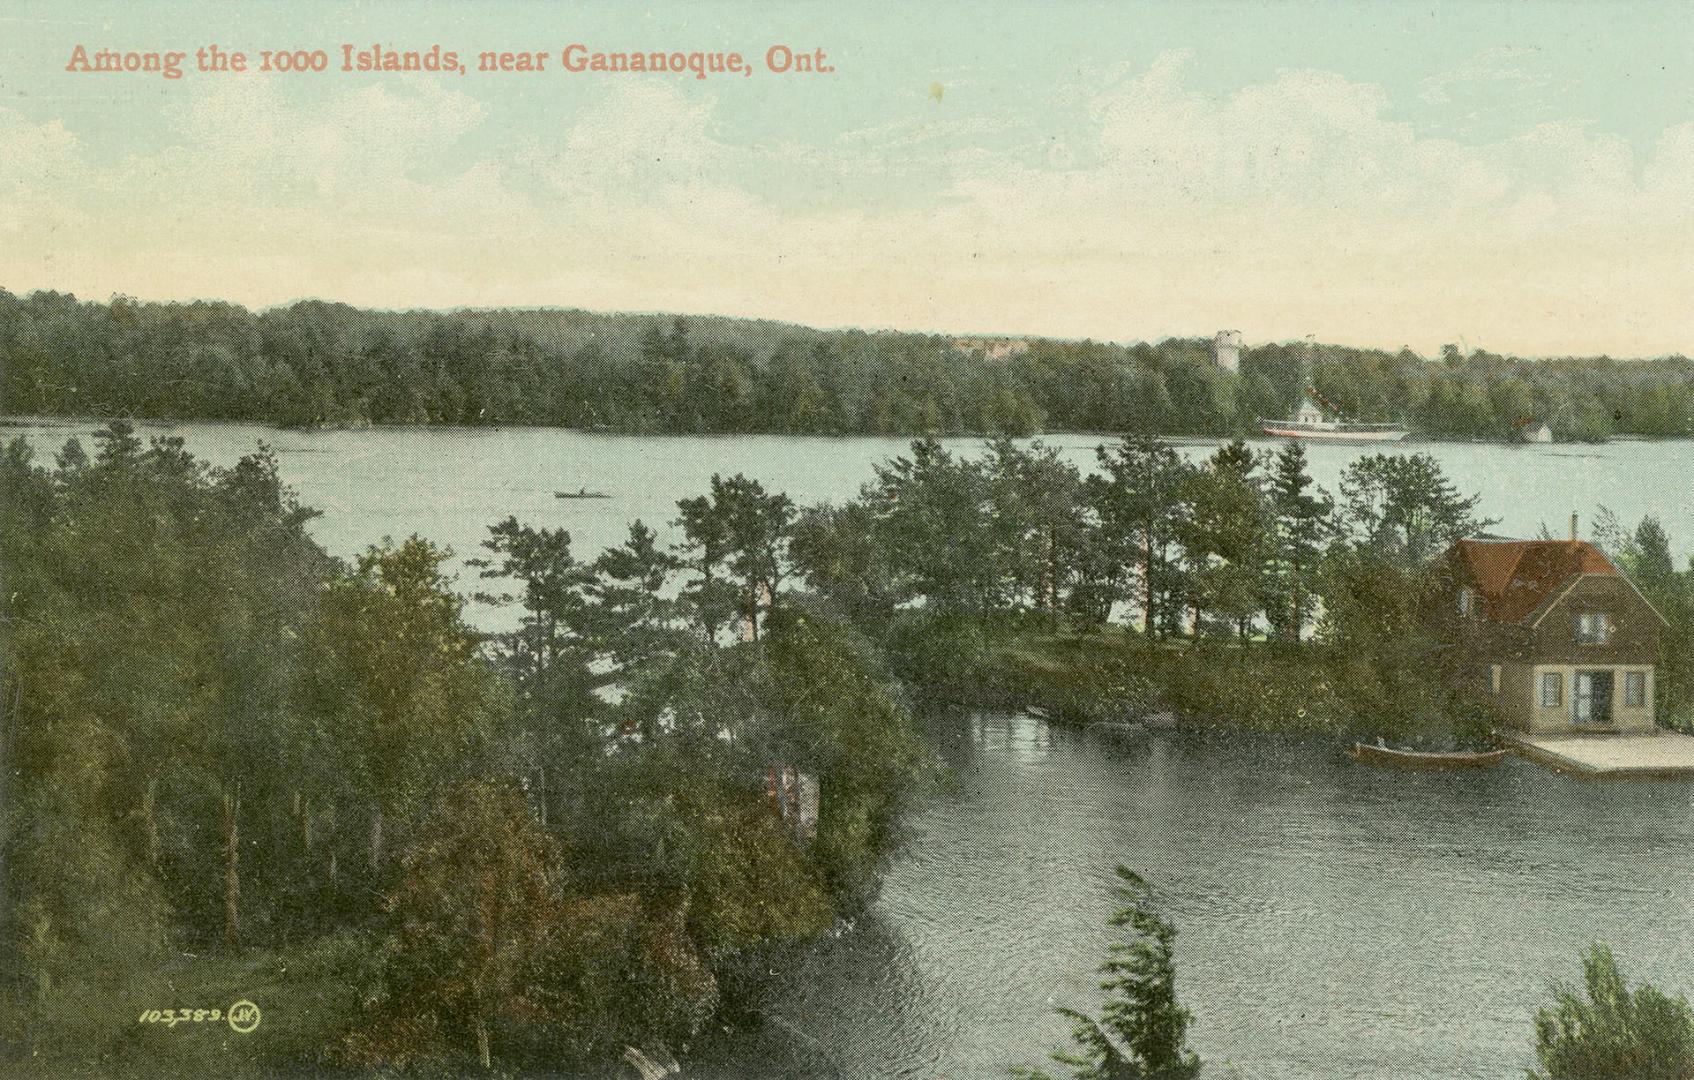 Colorized photograph of river. Islands are in the foreground, one with a boathouse on it.